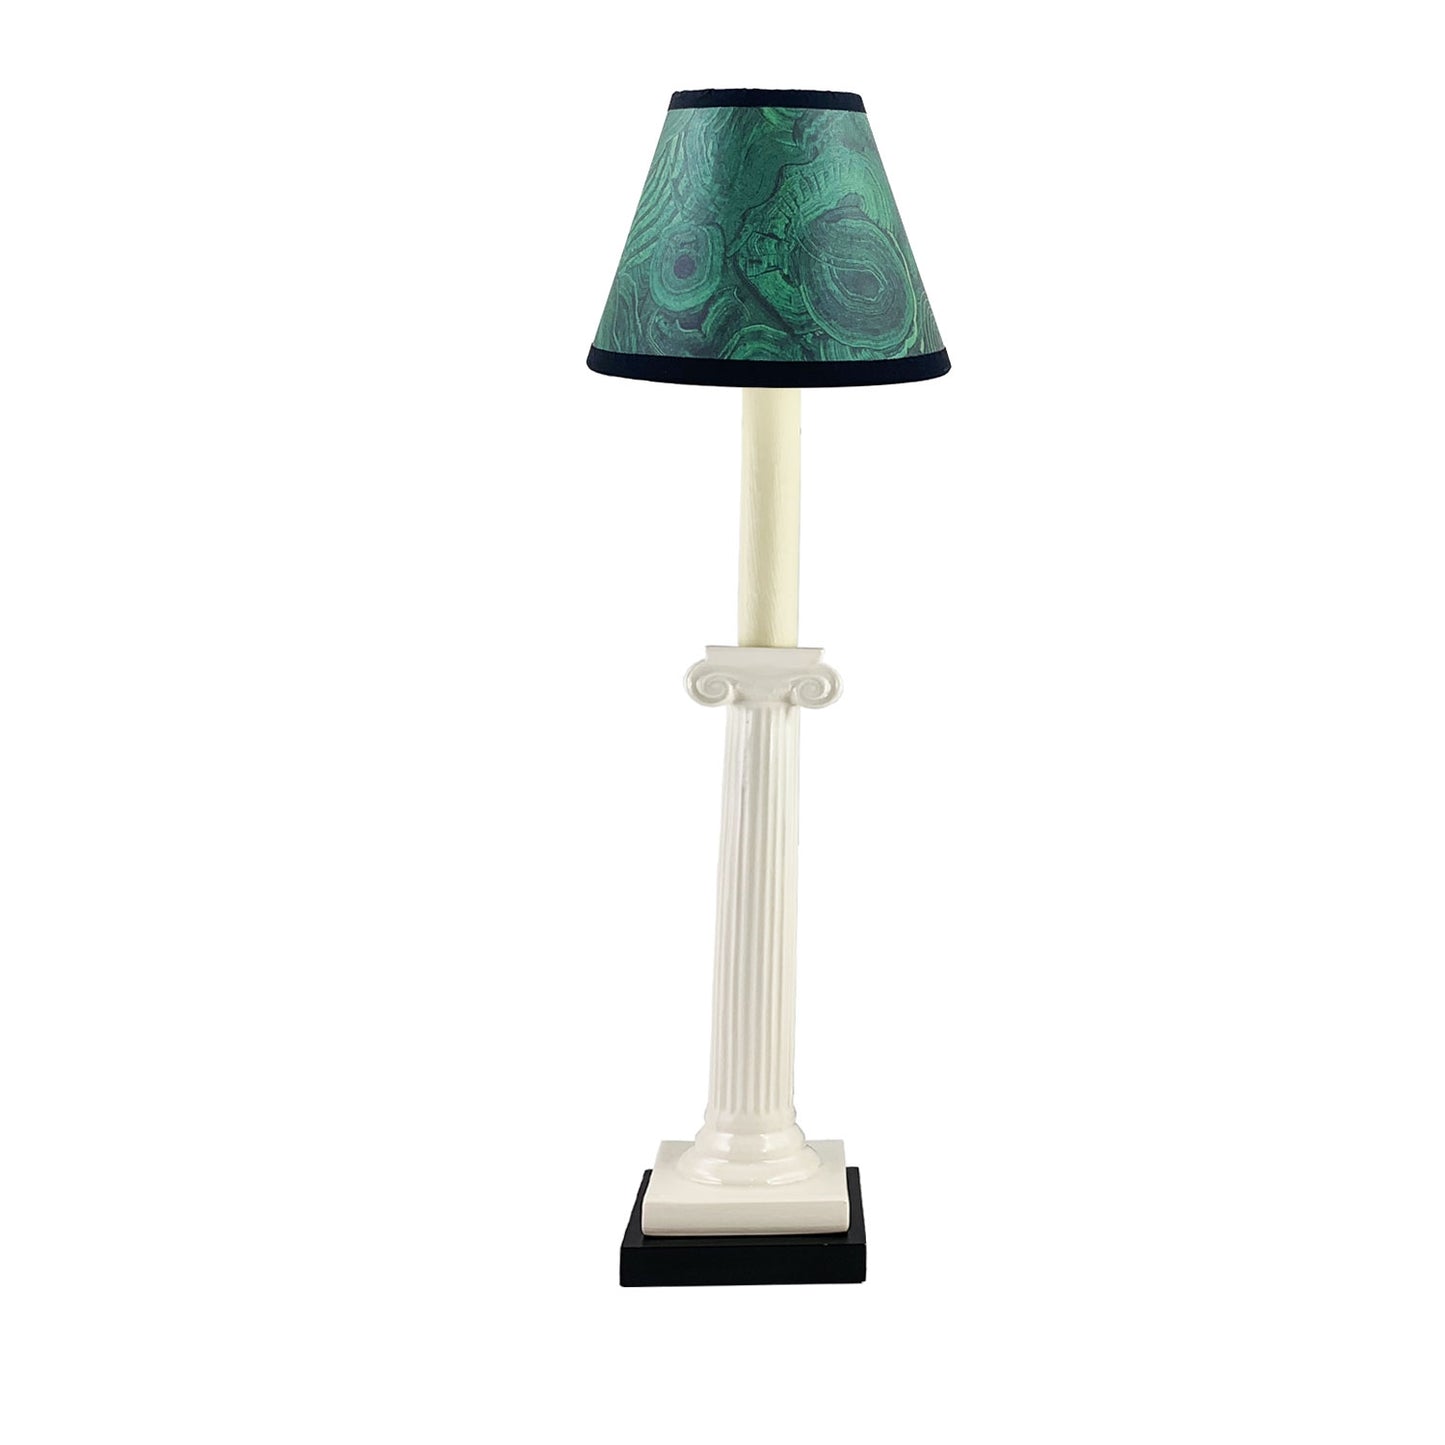 The P&H Ionic Column Table Lamp